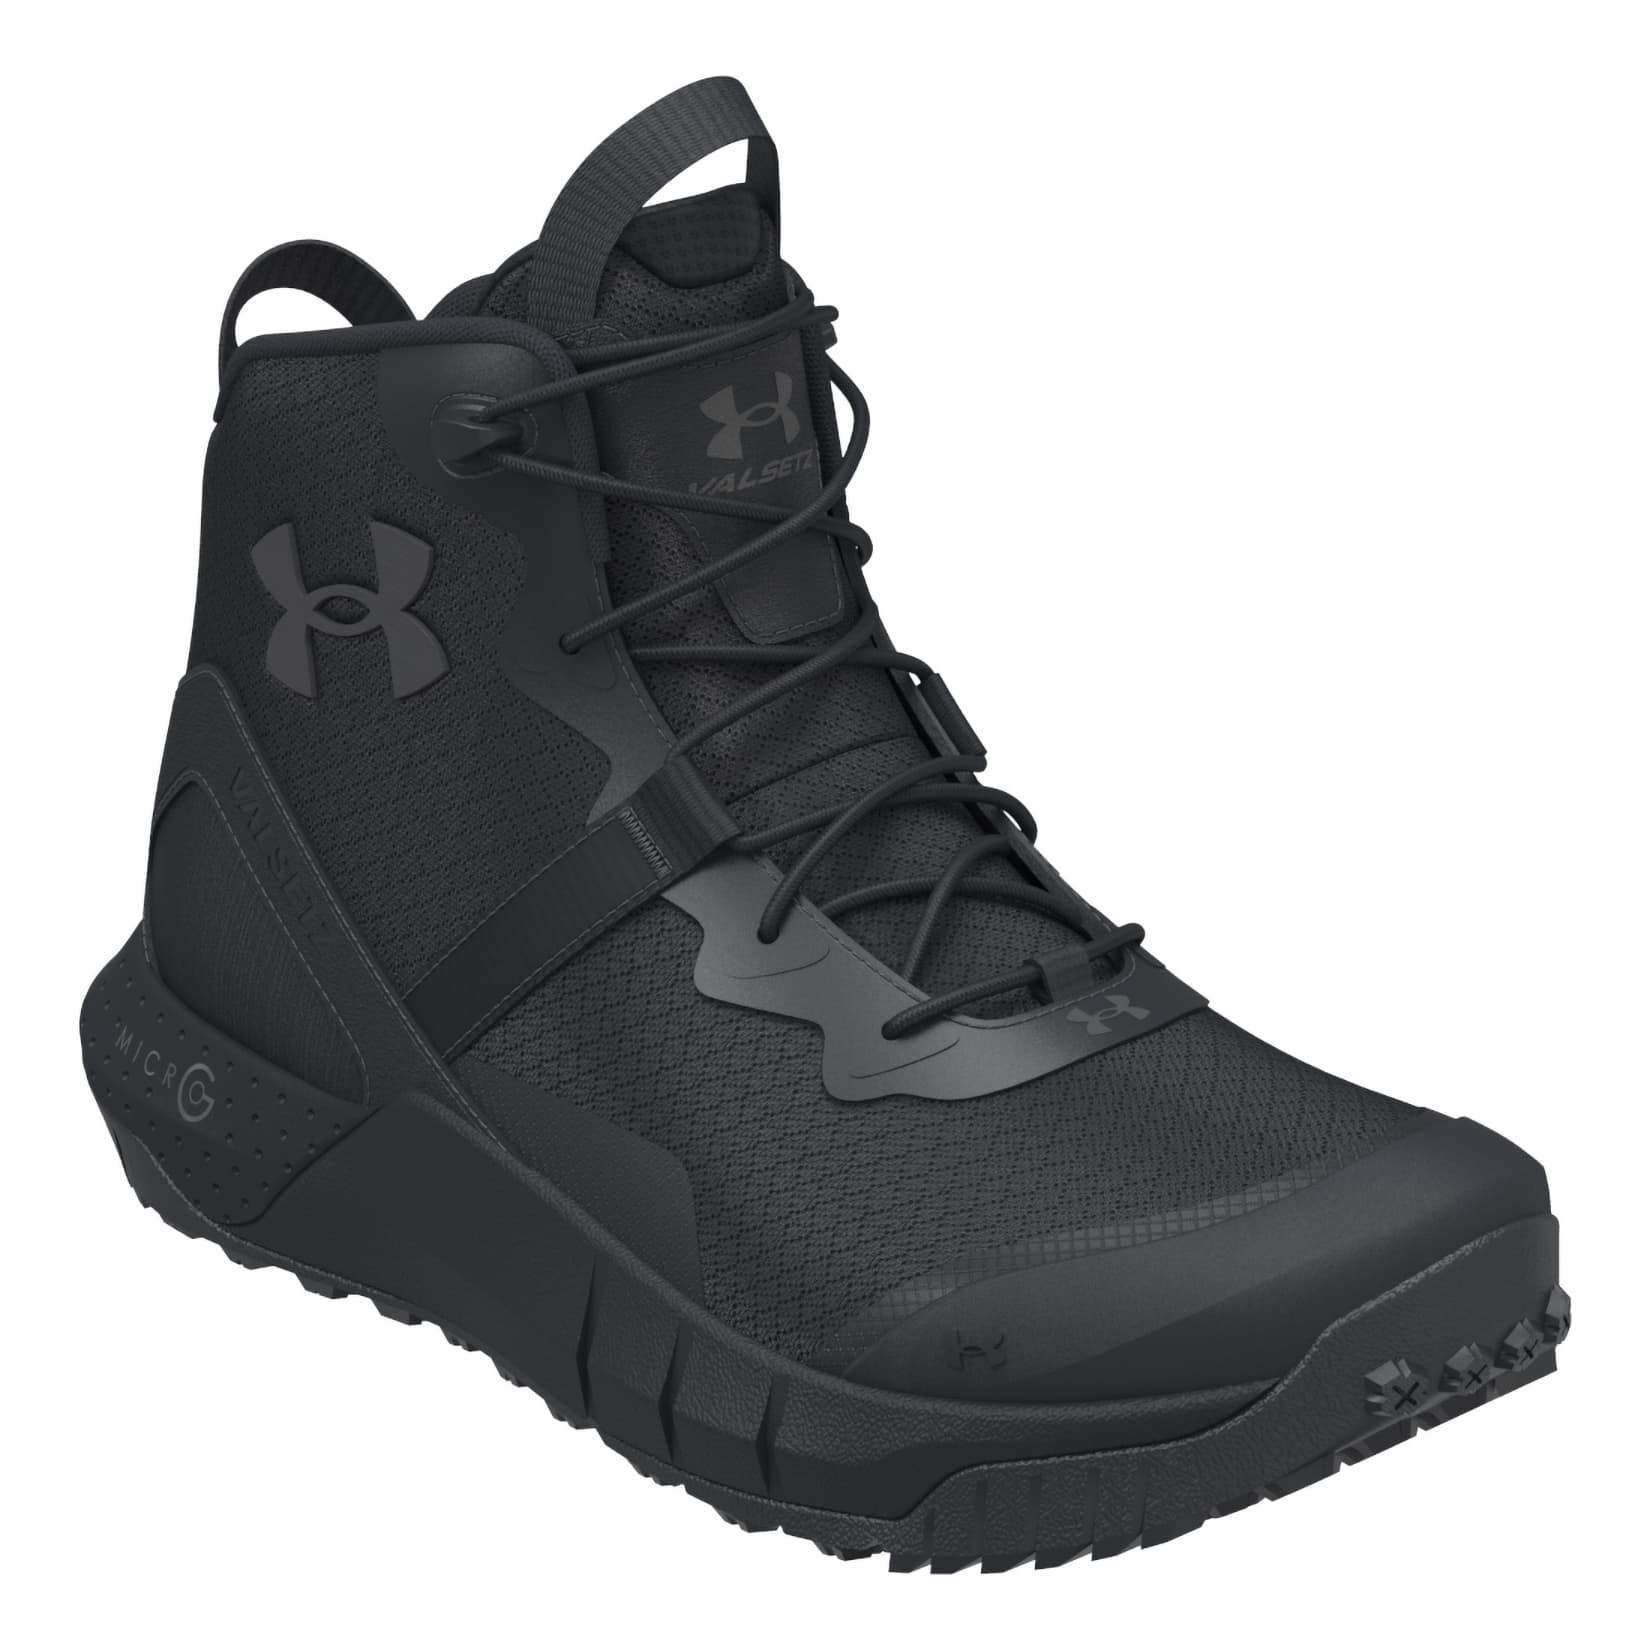  Under Armour Mens Micro G Valsetz Mid Military And Tactical  Boot